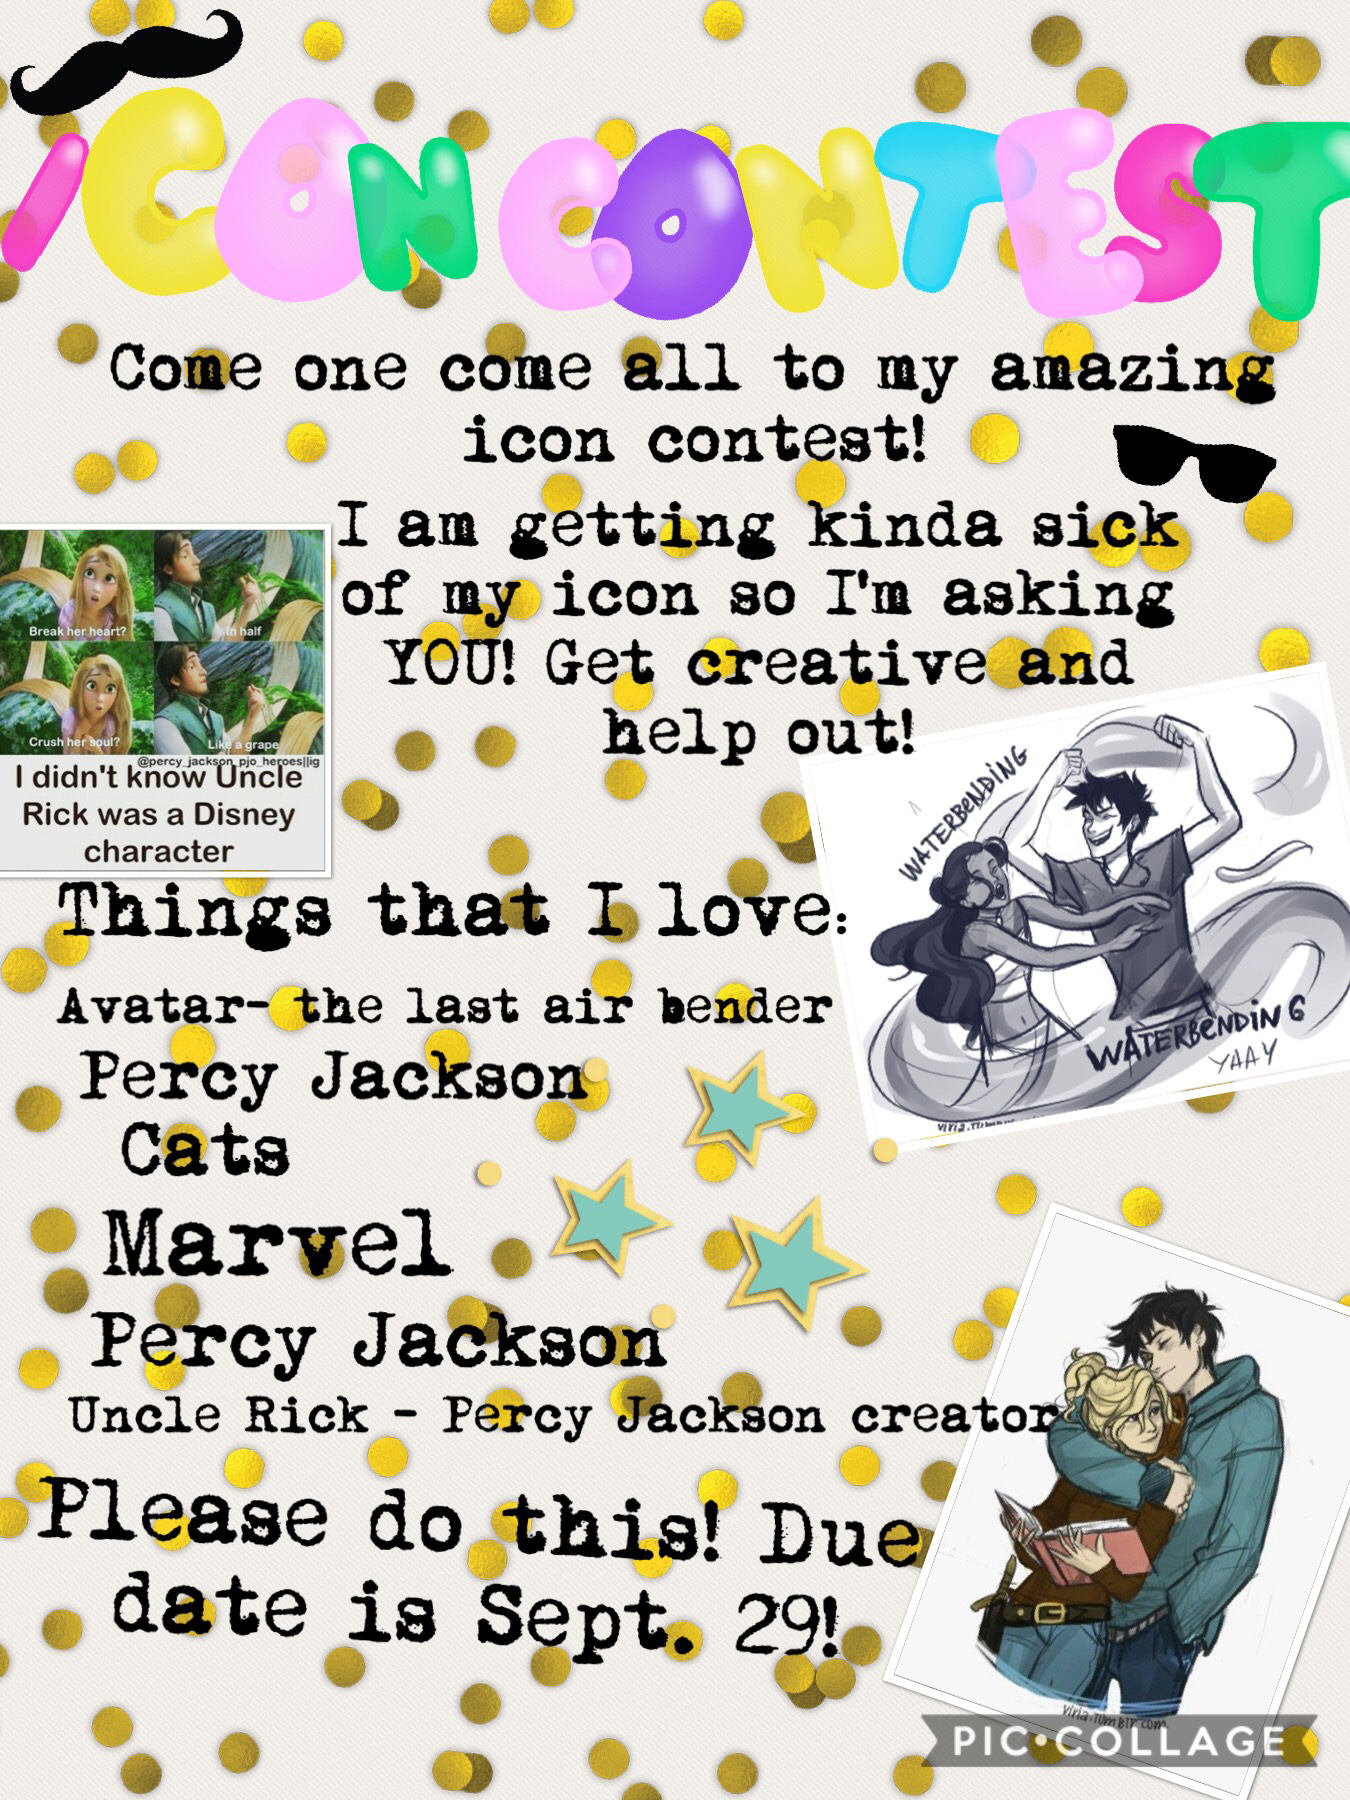 ICON CONTEST!! please doooo! You guys didn’t do my last contest so you better do this one! Love ya lots! 